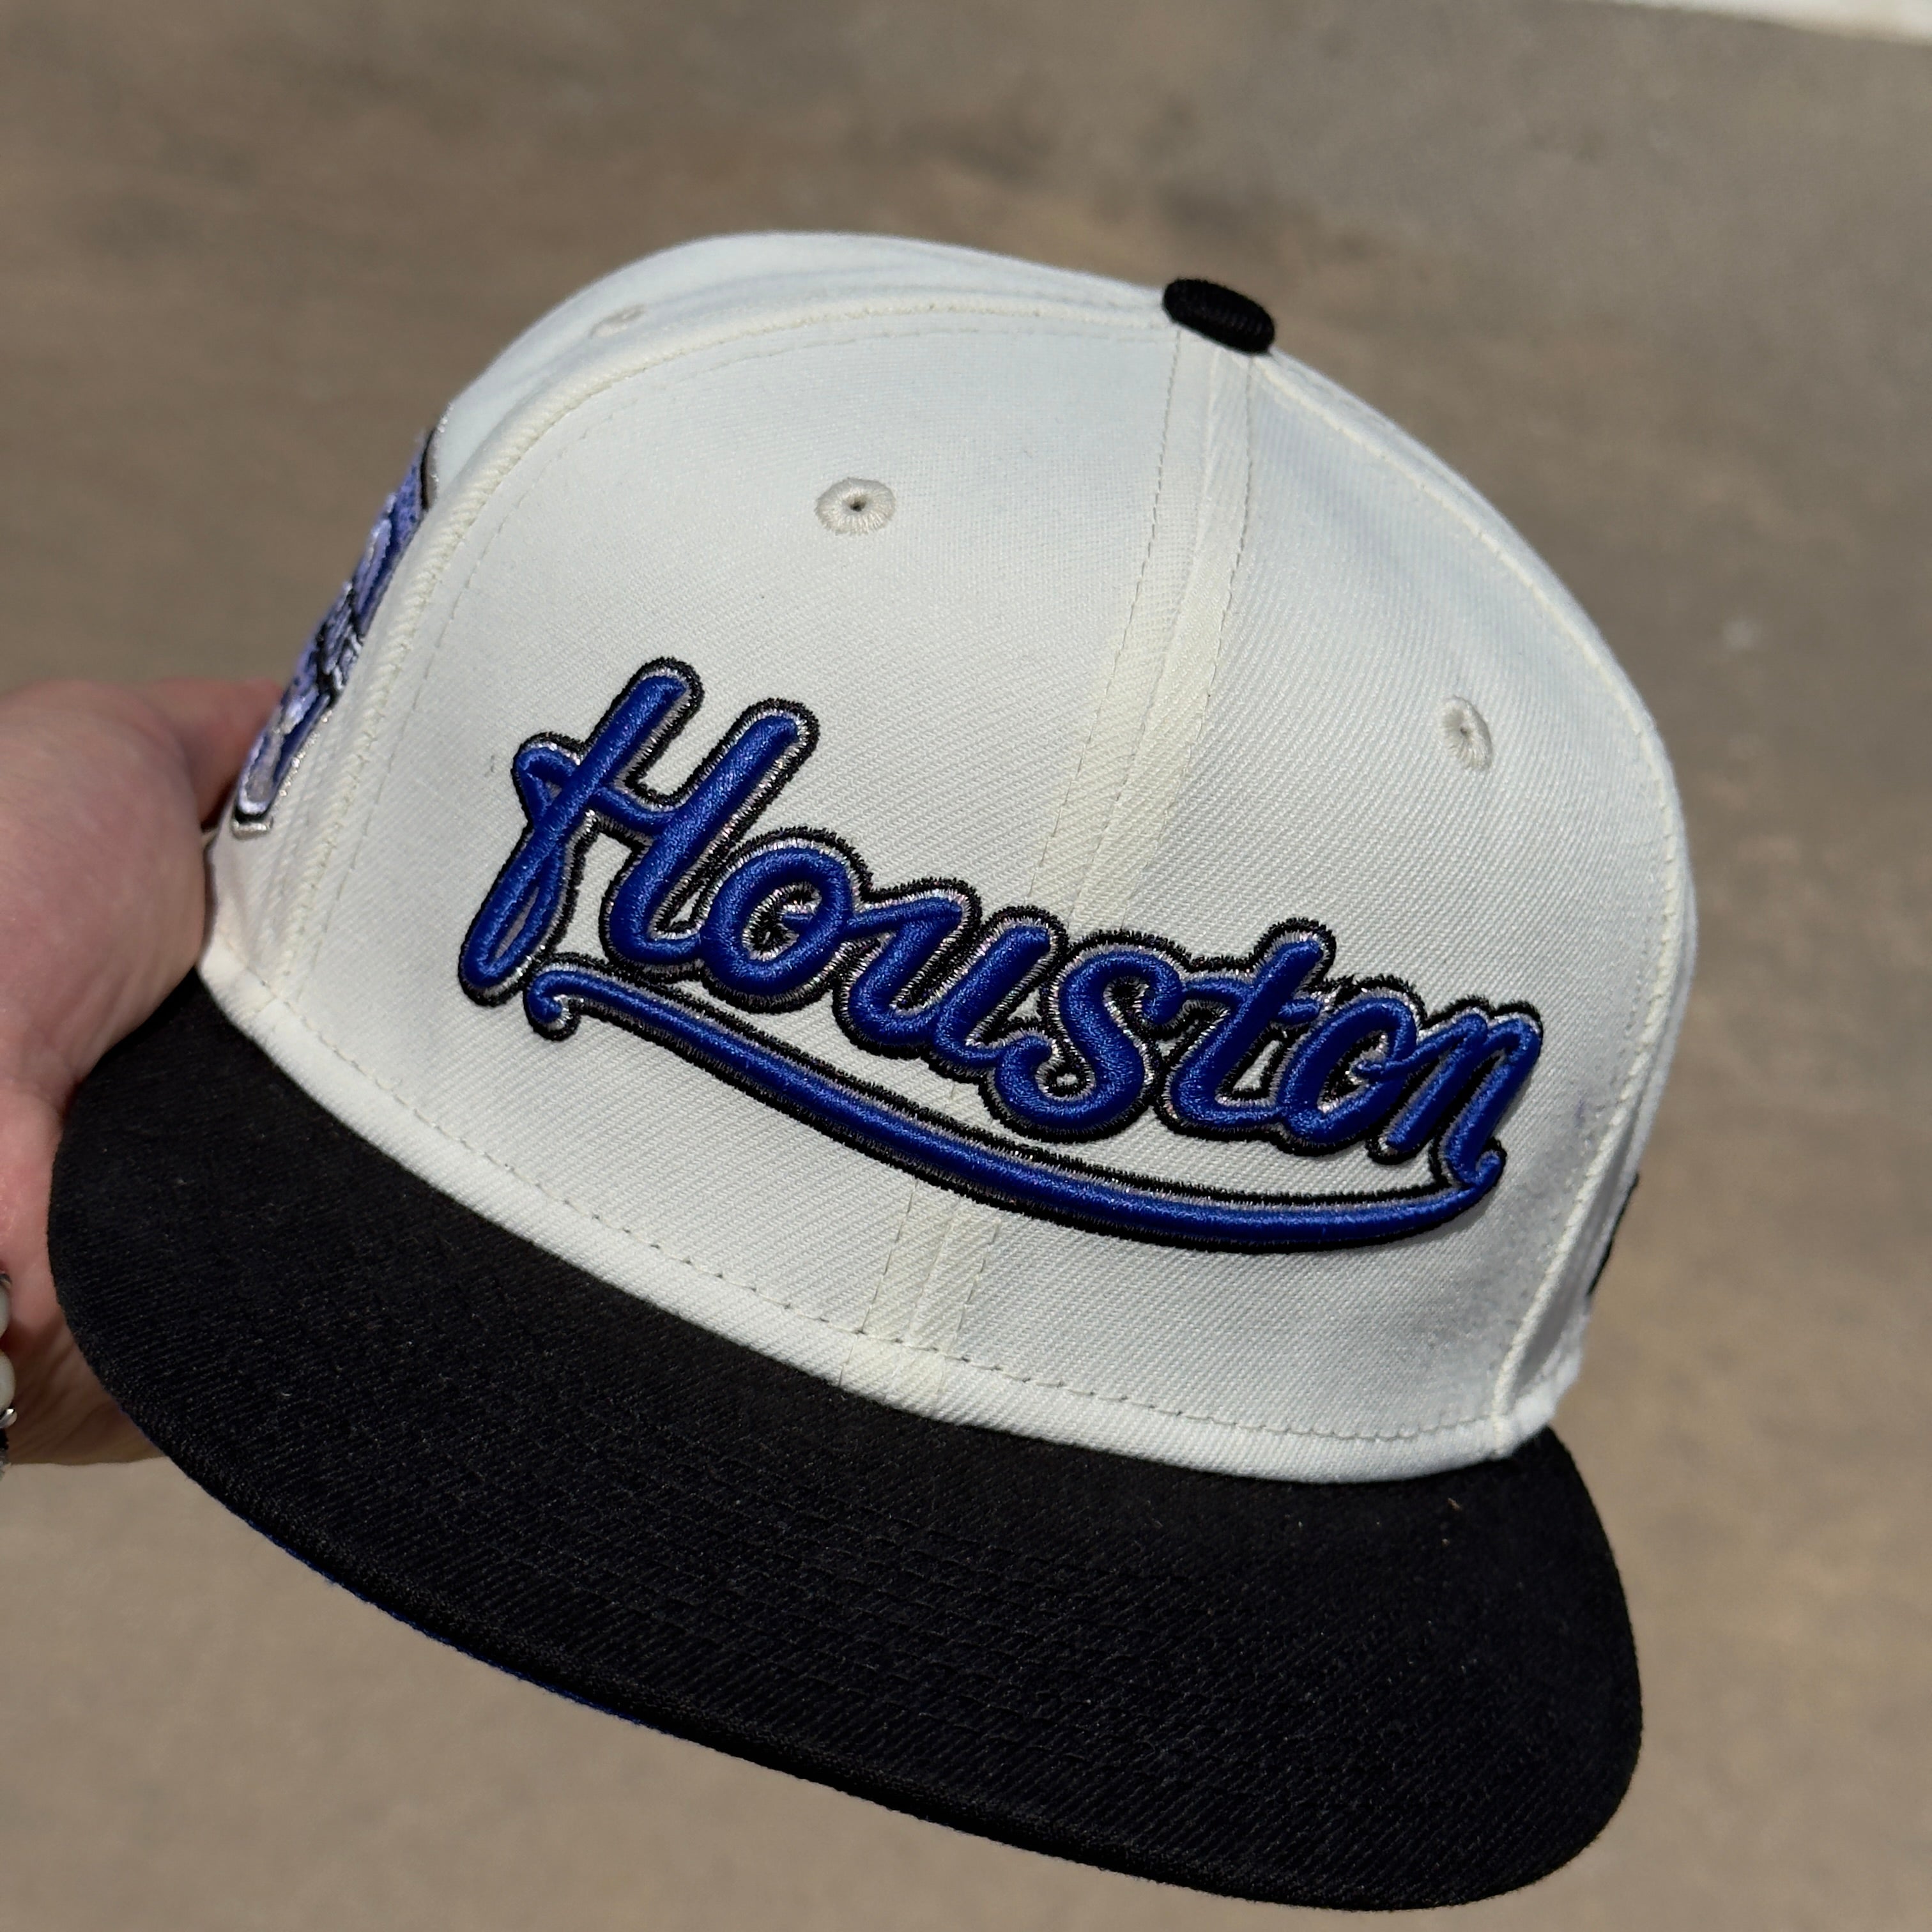 1/2 USED Chrome Houston Astros 20 Years Blue 59fifty New Era Fitted Hat Cap